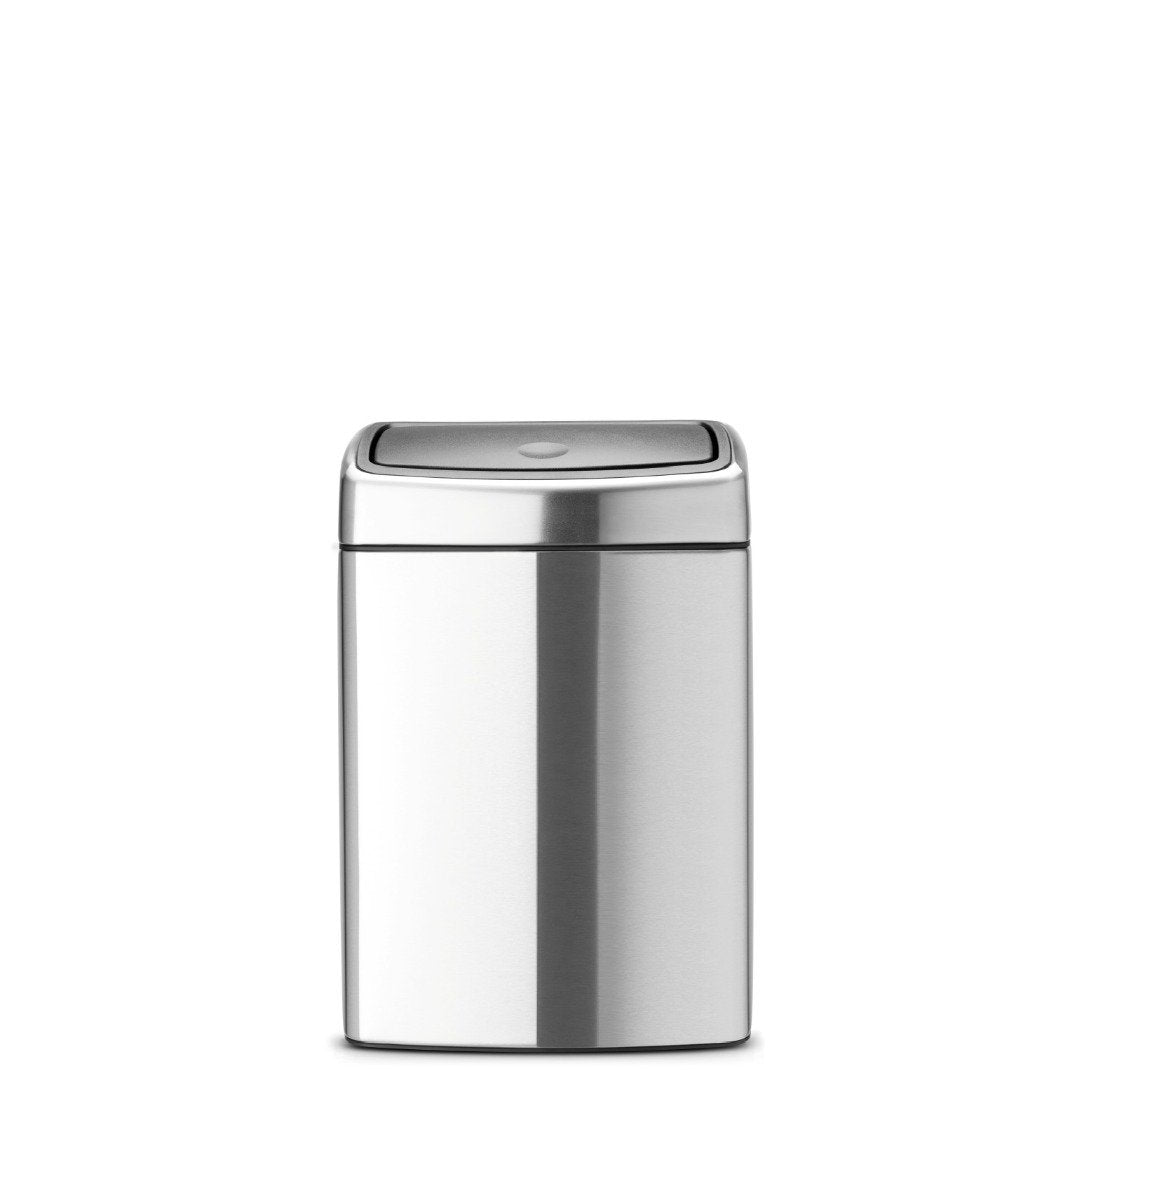 Brabantia Rectangular Single Compartment 10 Litre Touch Opening Kitchen Bin in Stainless Steel: 477225